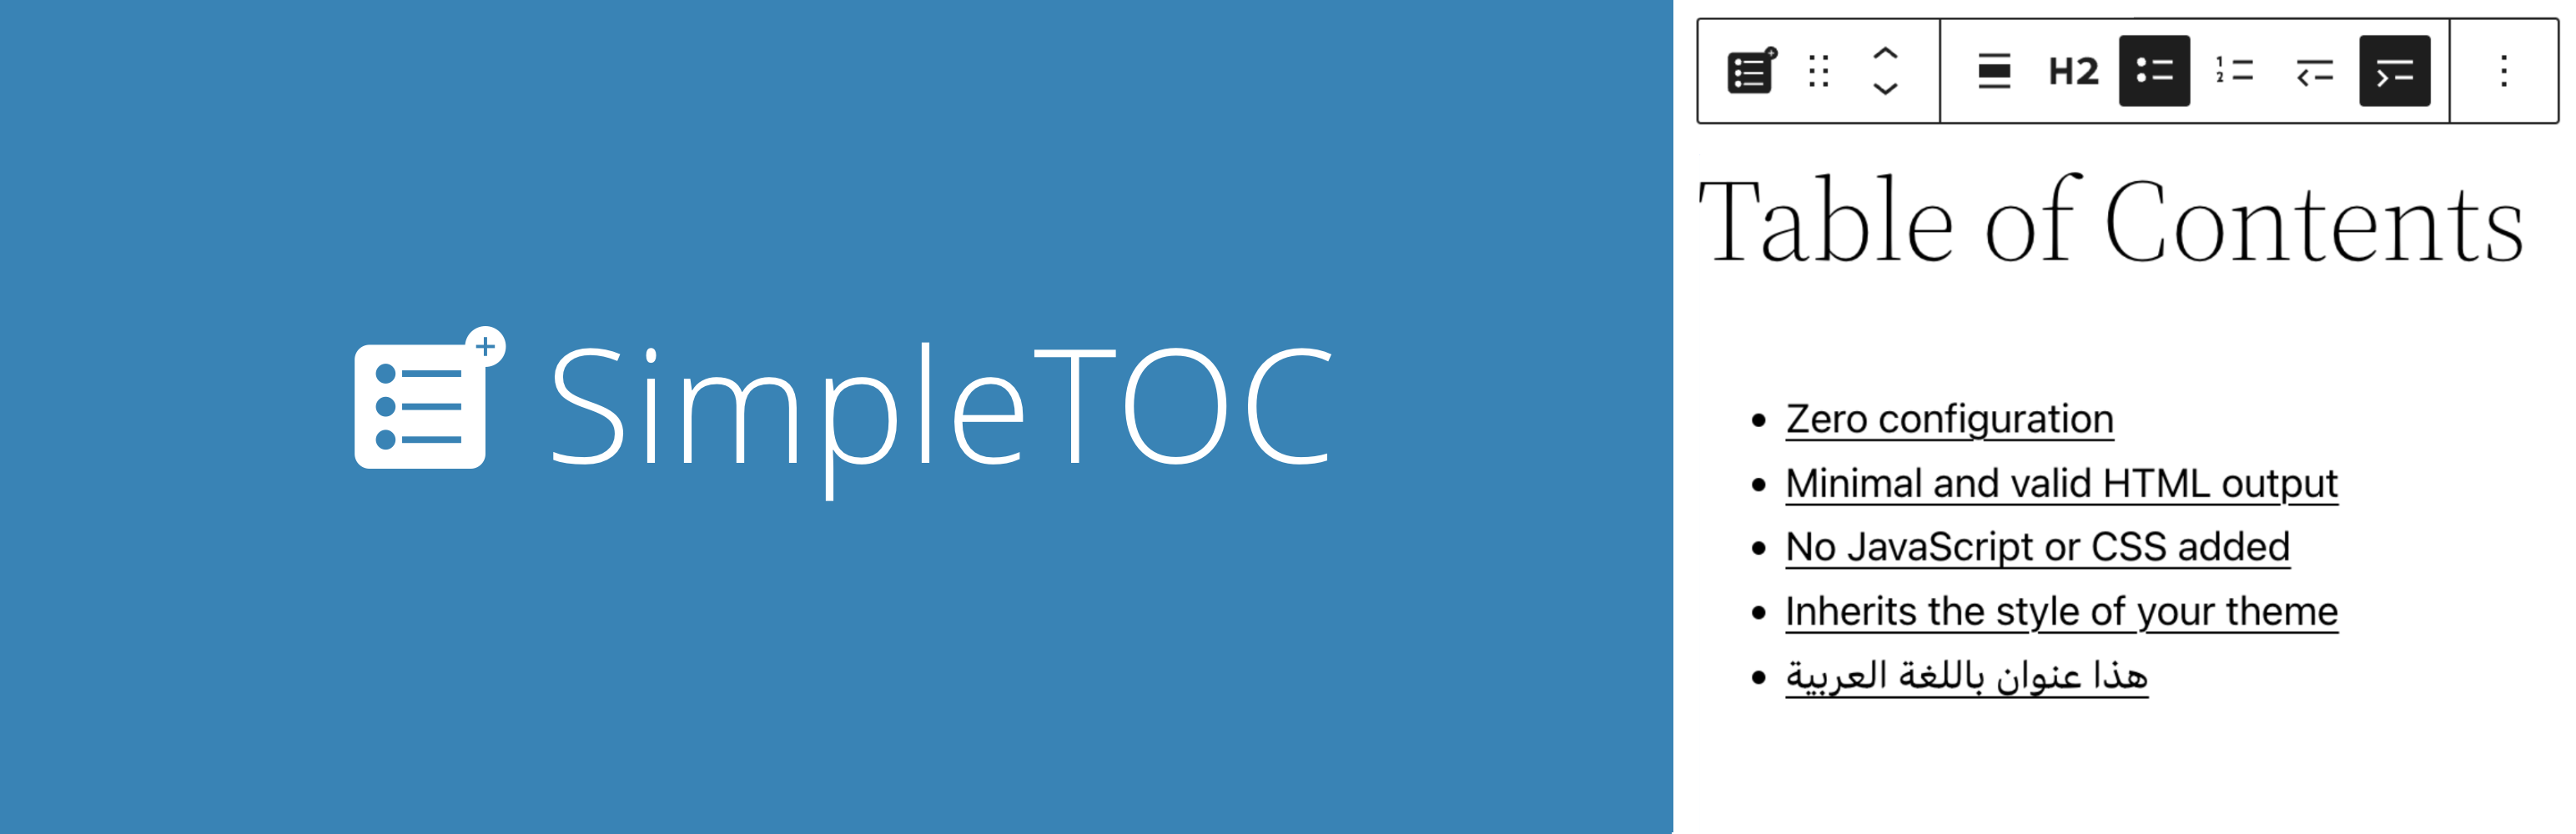 SimpleTOC — Table of Contents Block